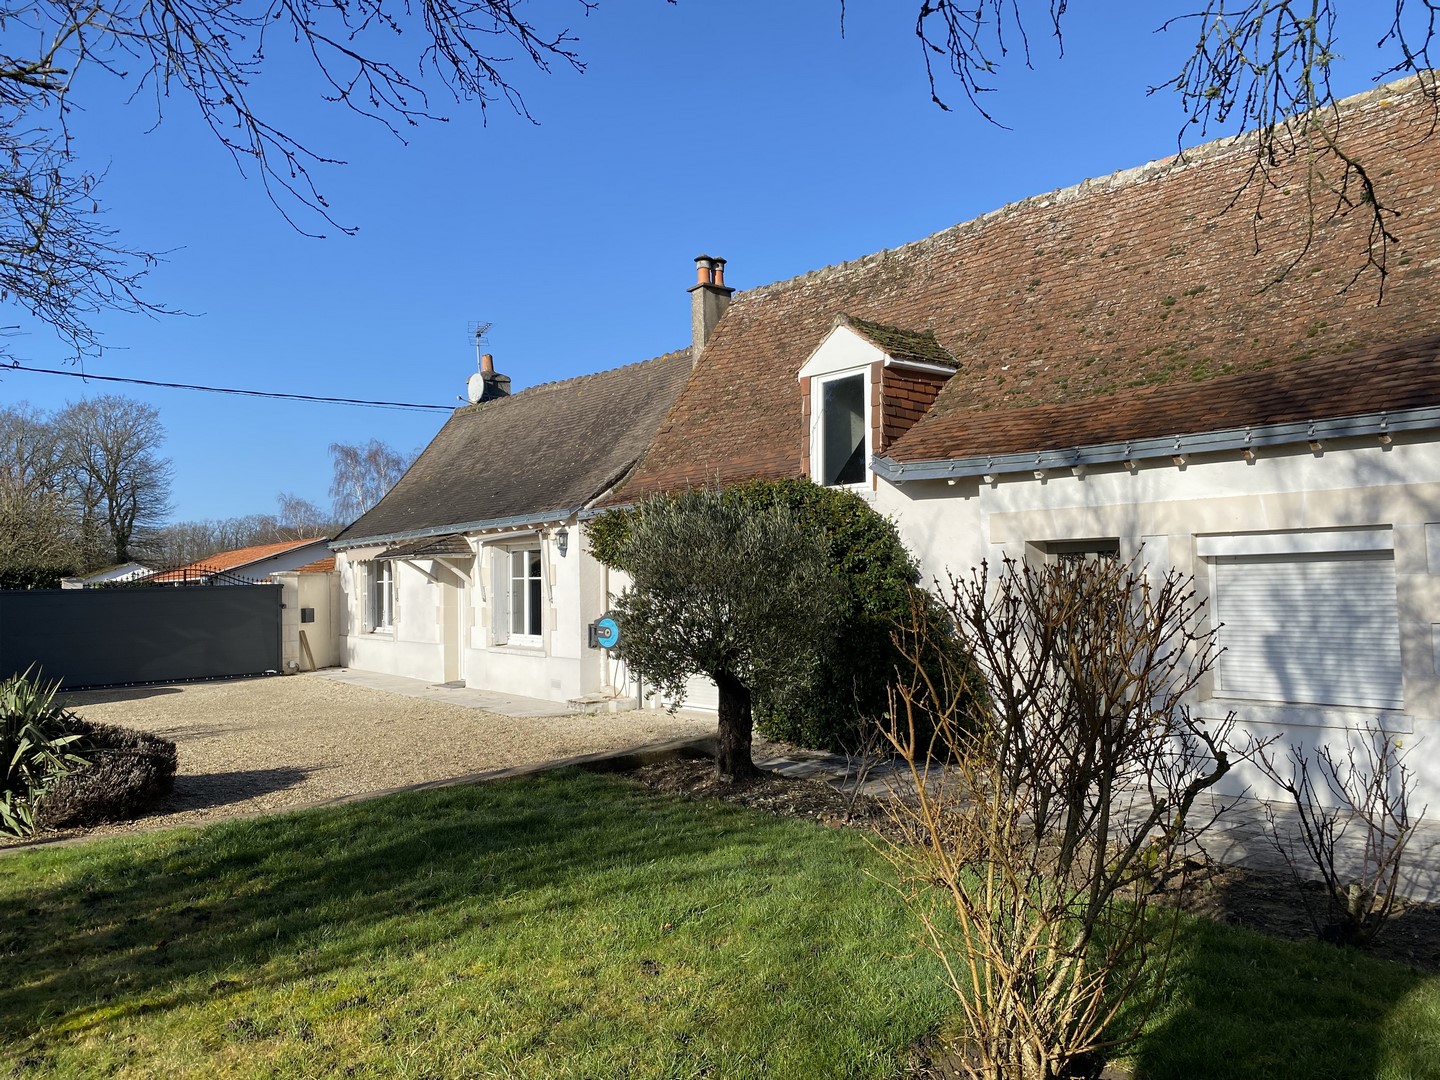 SOLD – COTTAGE ON ONE LEVEL – SOUTH OF TOURS LAND 4.000m² SWIMMING POOL GARAGE PARKING